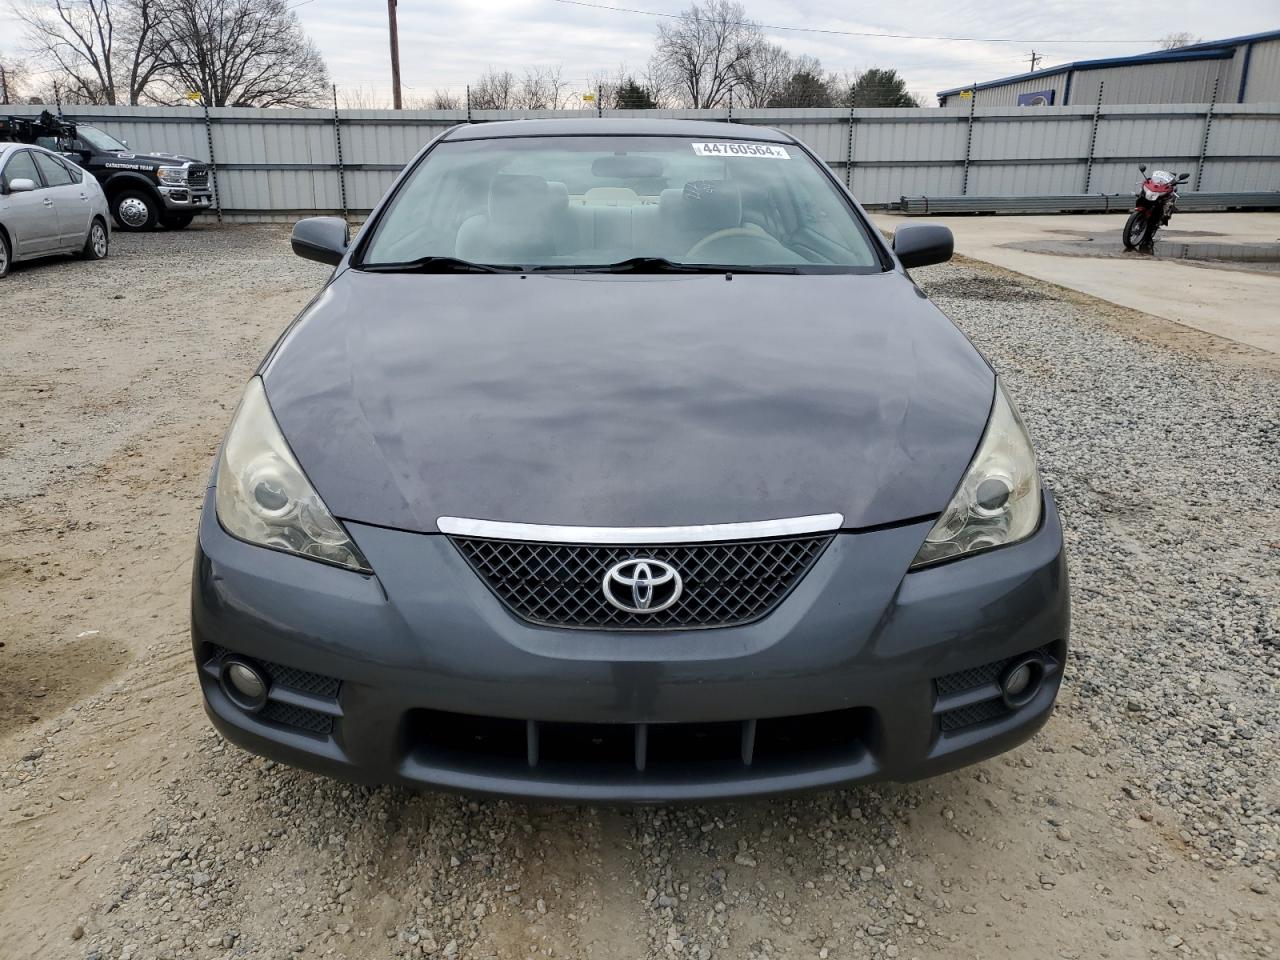 Lot #2361586796 2007 TOYOTA CAMRY SOLA